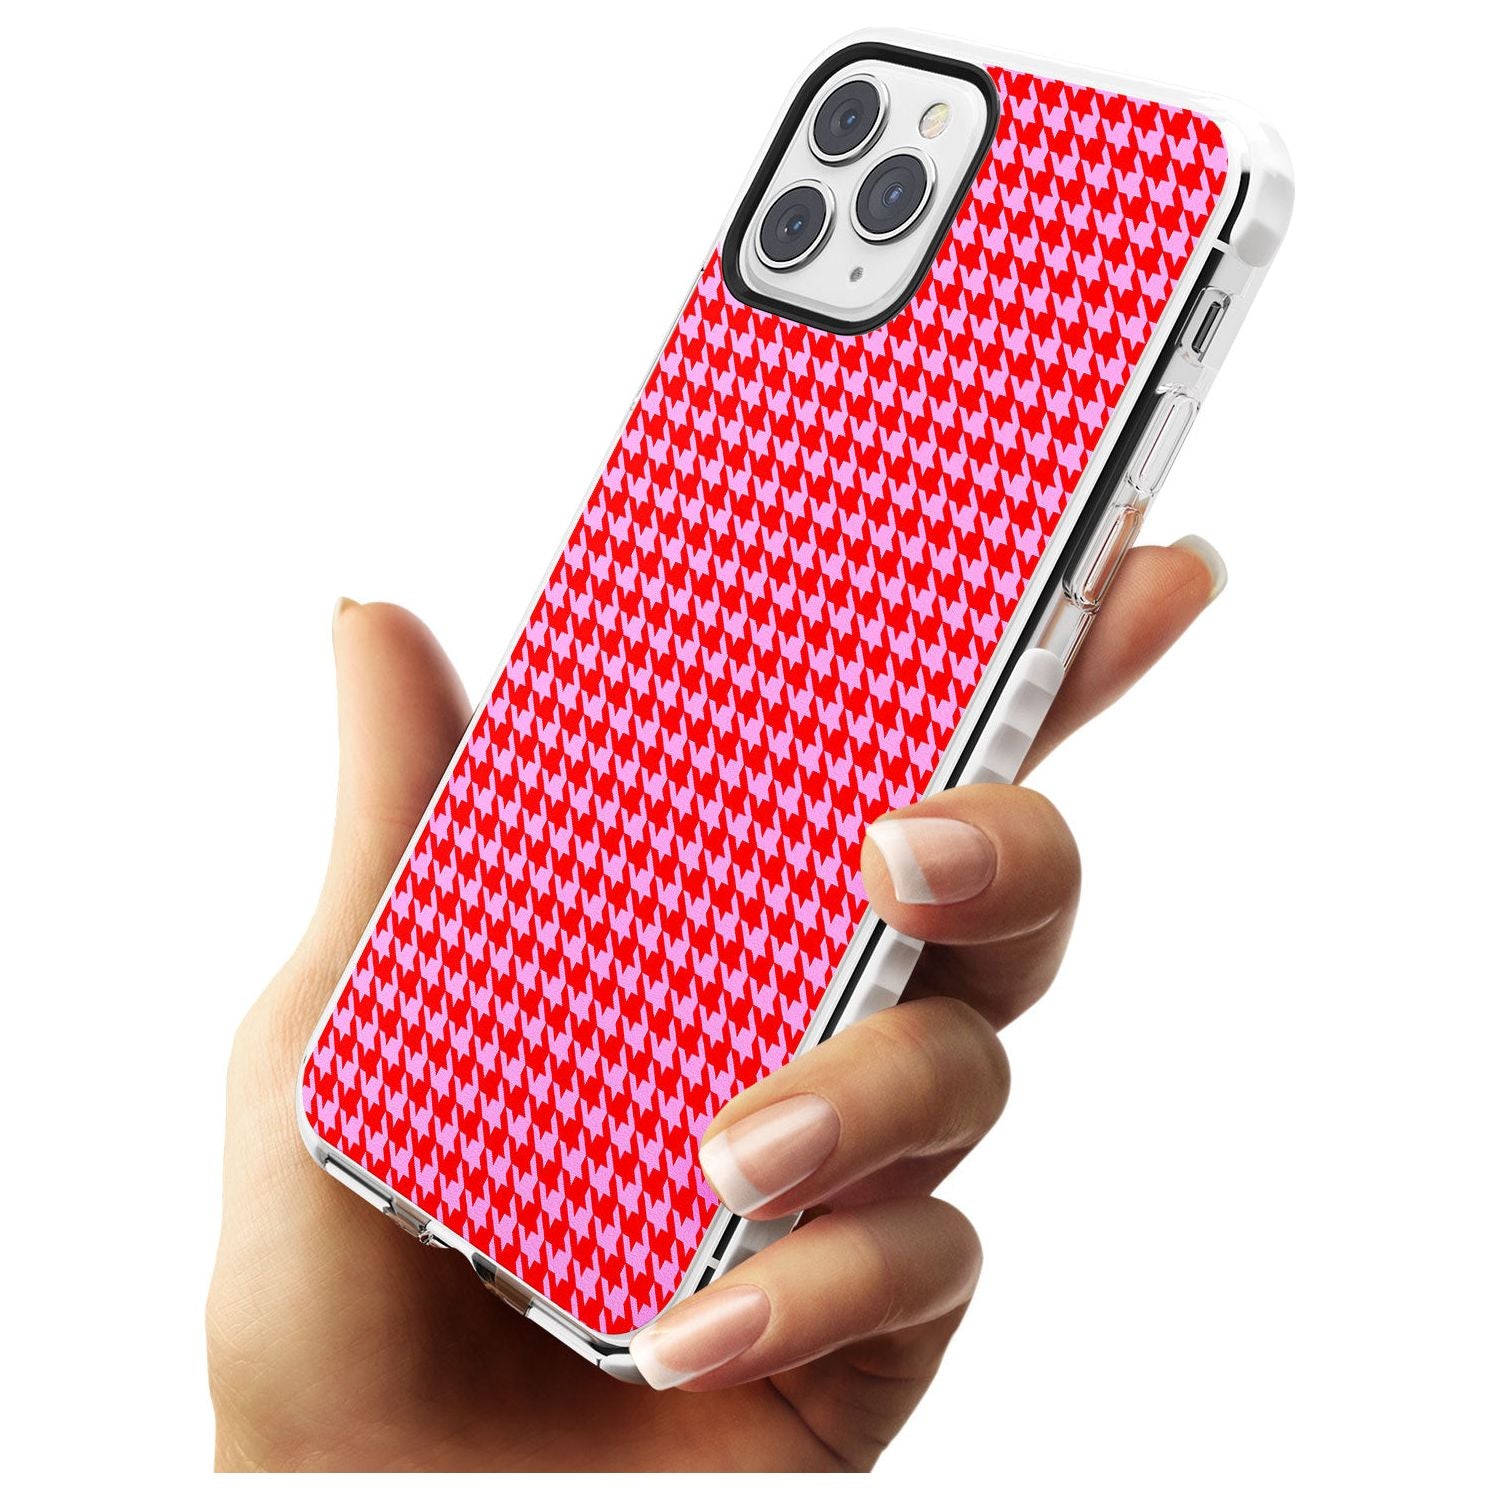 Neon Pink & Red Houndstooth Pattern Impact Phone Case for iPhone 11 Pro Max